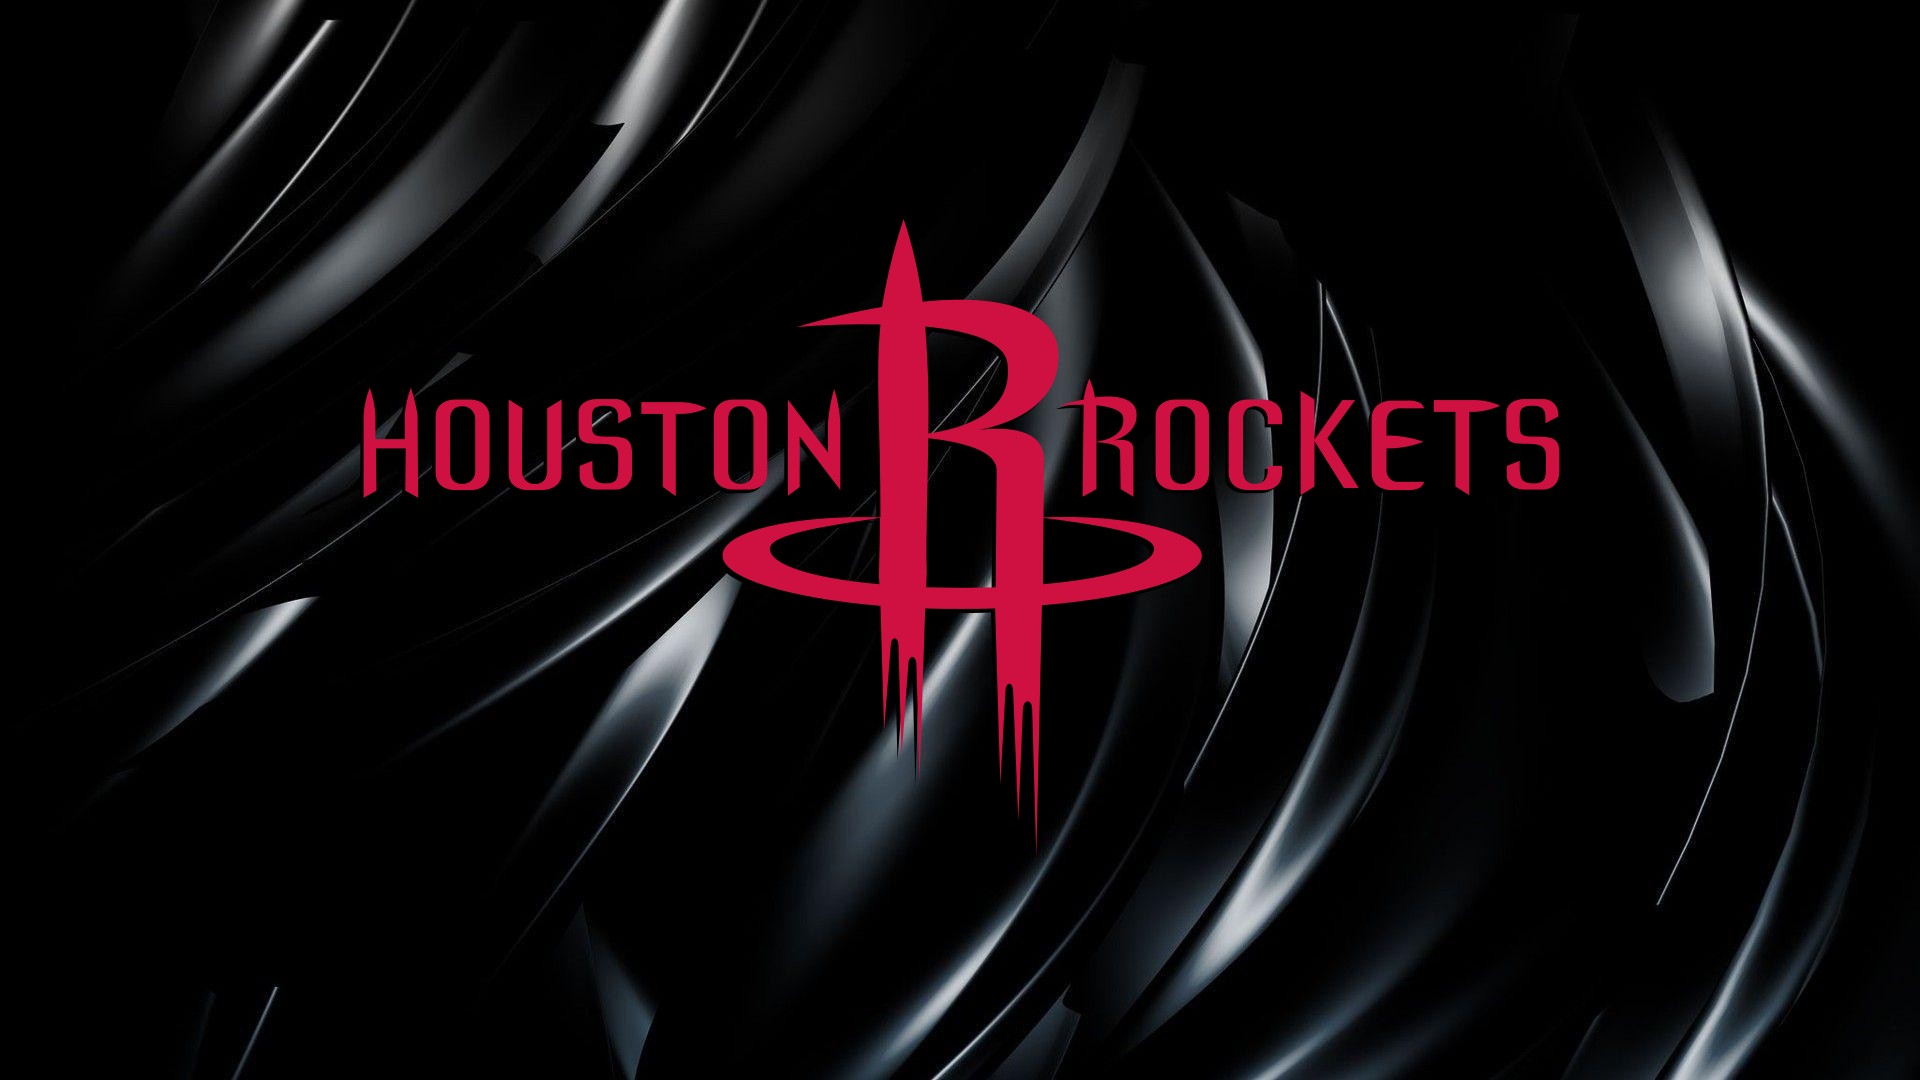 Houston Rockets Desktop Wallpapers with image dimensions 1920x1080 pixel. You can make this wallpaper for your Desktop Computer Backgrounds, Windows or Mac Screensavers, iPhone Lock screen, Tablet or Android and another Mobile Phone device